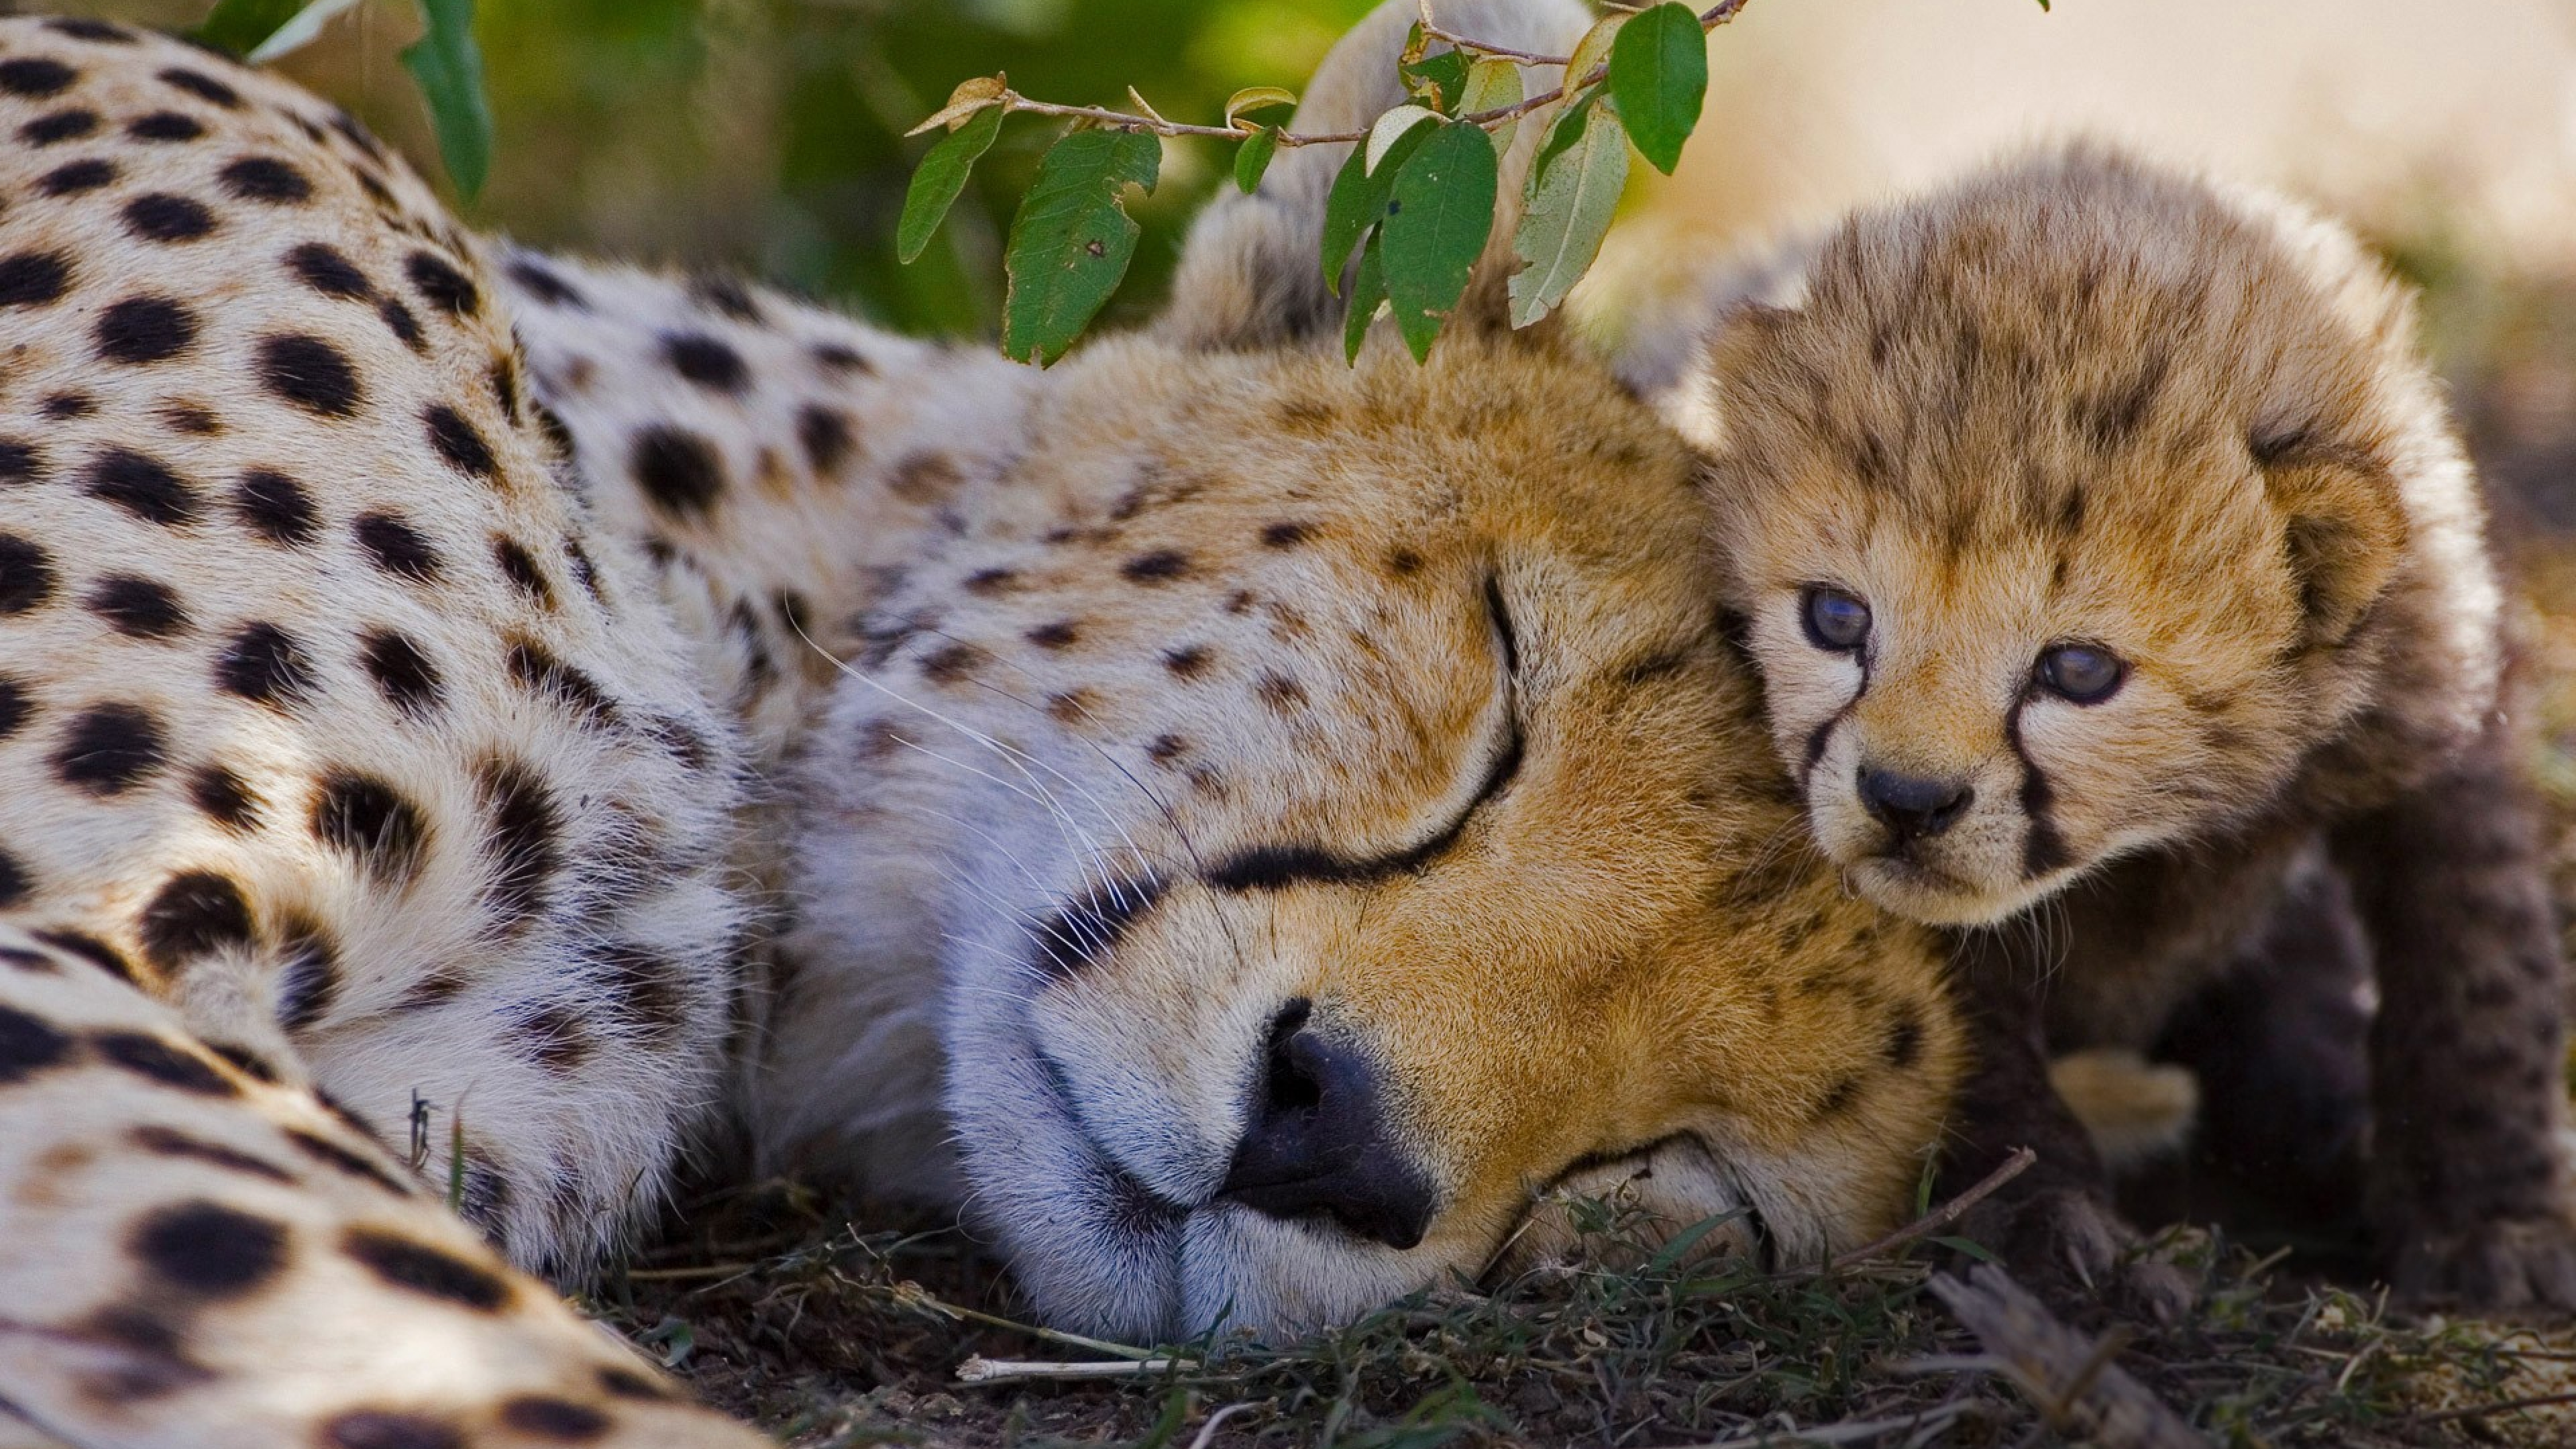 Sleeping cheetah with baby wallpapers and images - wallpapers ...